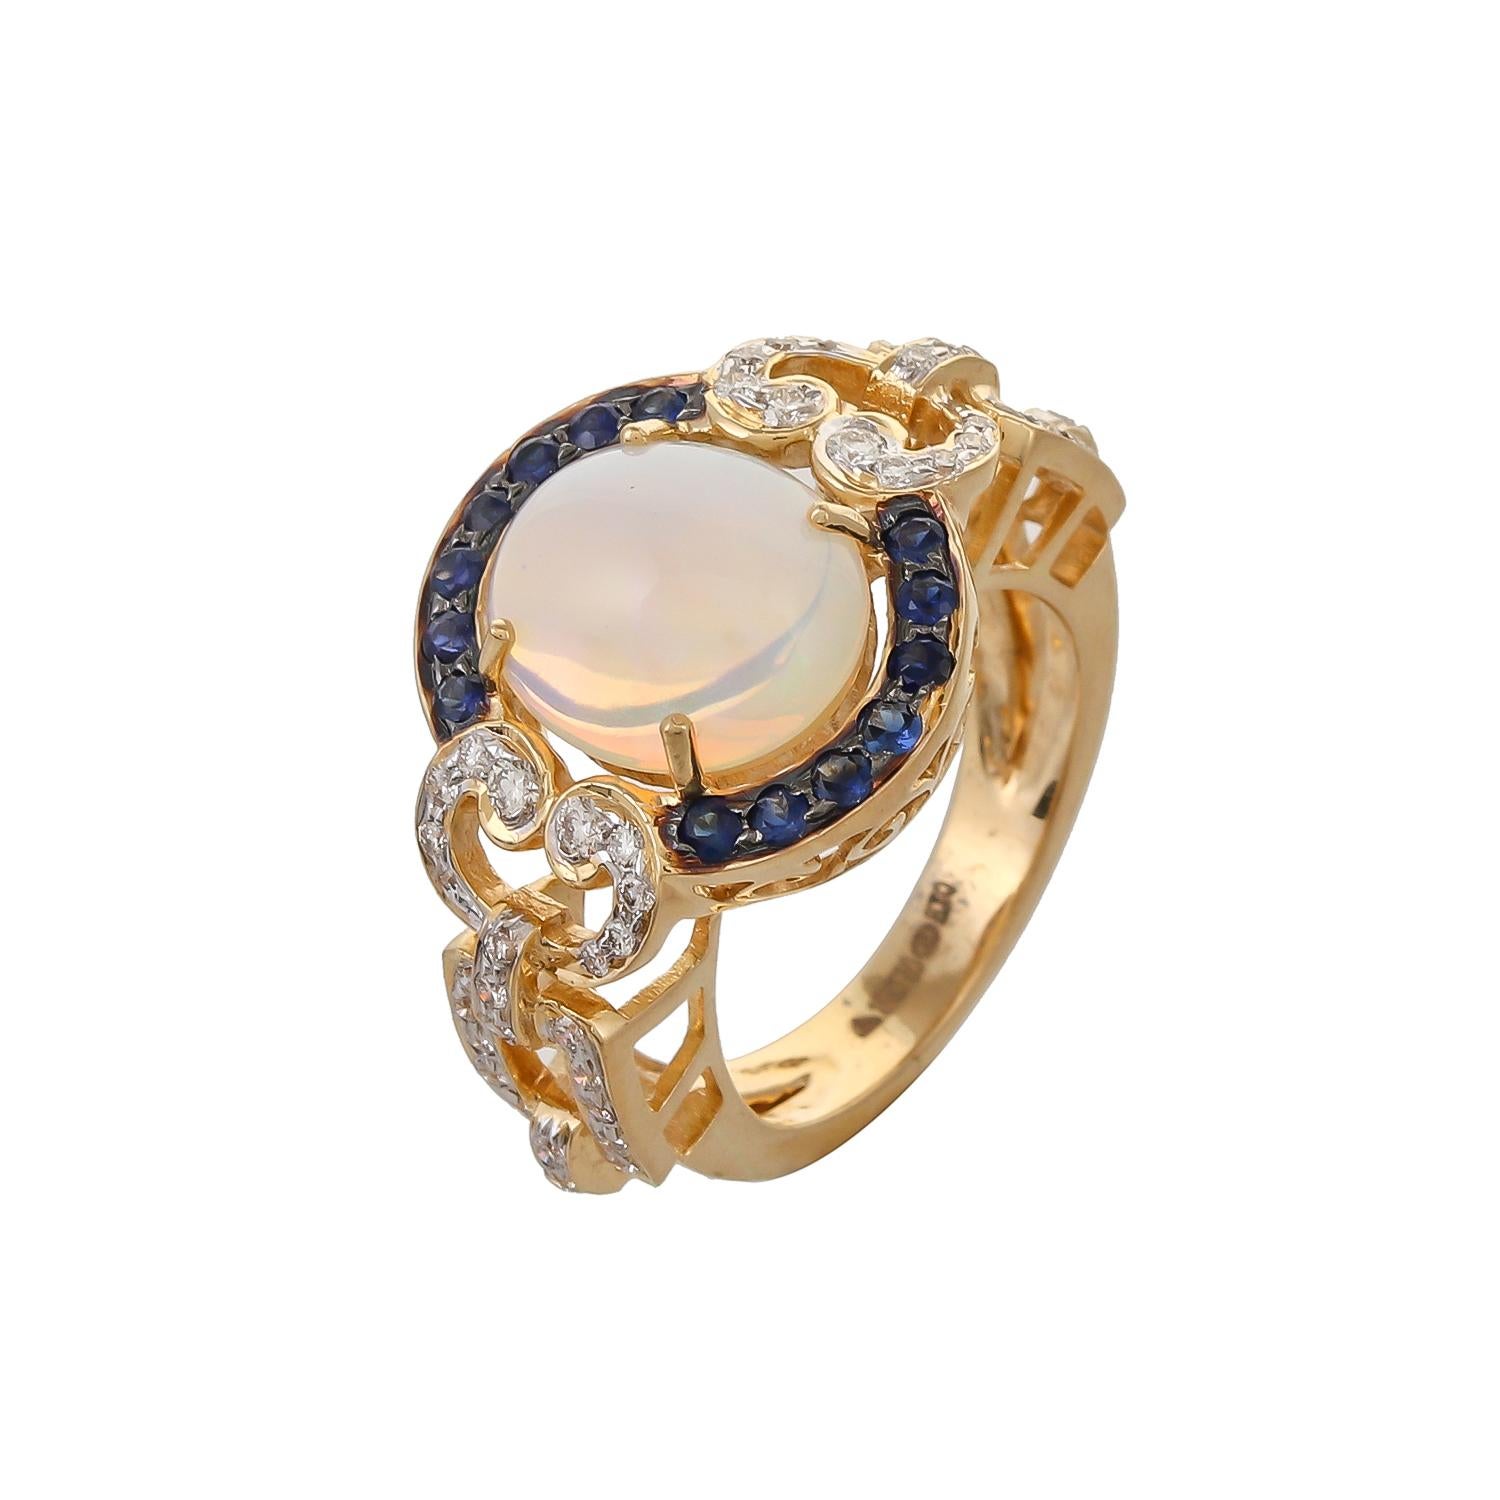 Contemporary 3.20 Carat Ethiopian Opal Cabochon Blue Sapphire Diamond 18kt Yellow Gold Ring For Sale